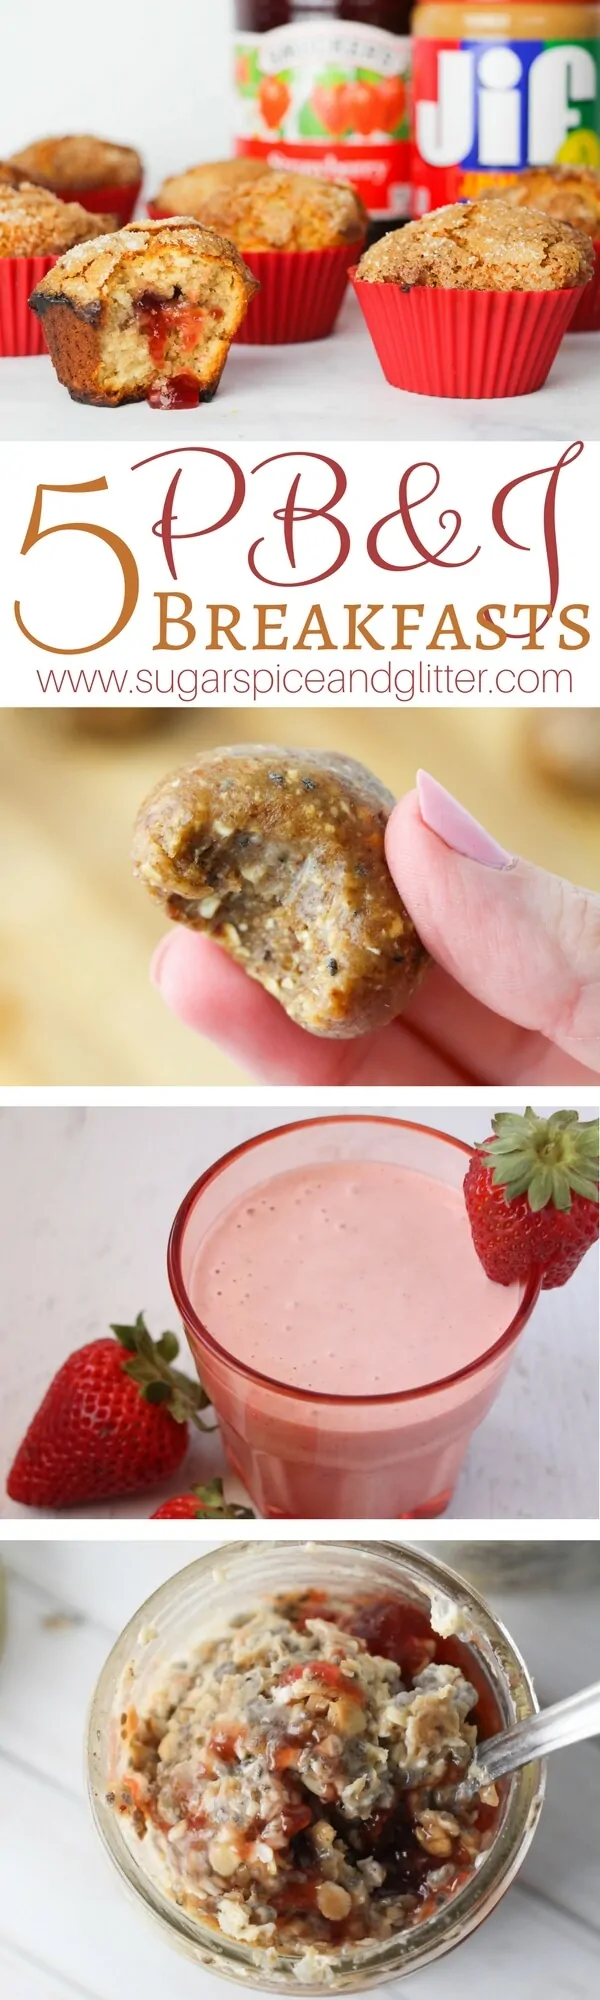 5 Delicious PB&J Breakfast Ideas that are quick, easy and can be taken on-the-go. PB&J Muffins, PB&J Energy Bites, PB&J Oatmeal Smoothie, PB&J French Toast Roll-ups and PB&J Overnight Oatmeal.